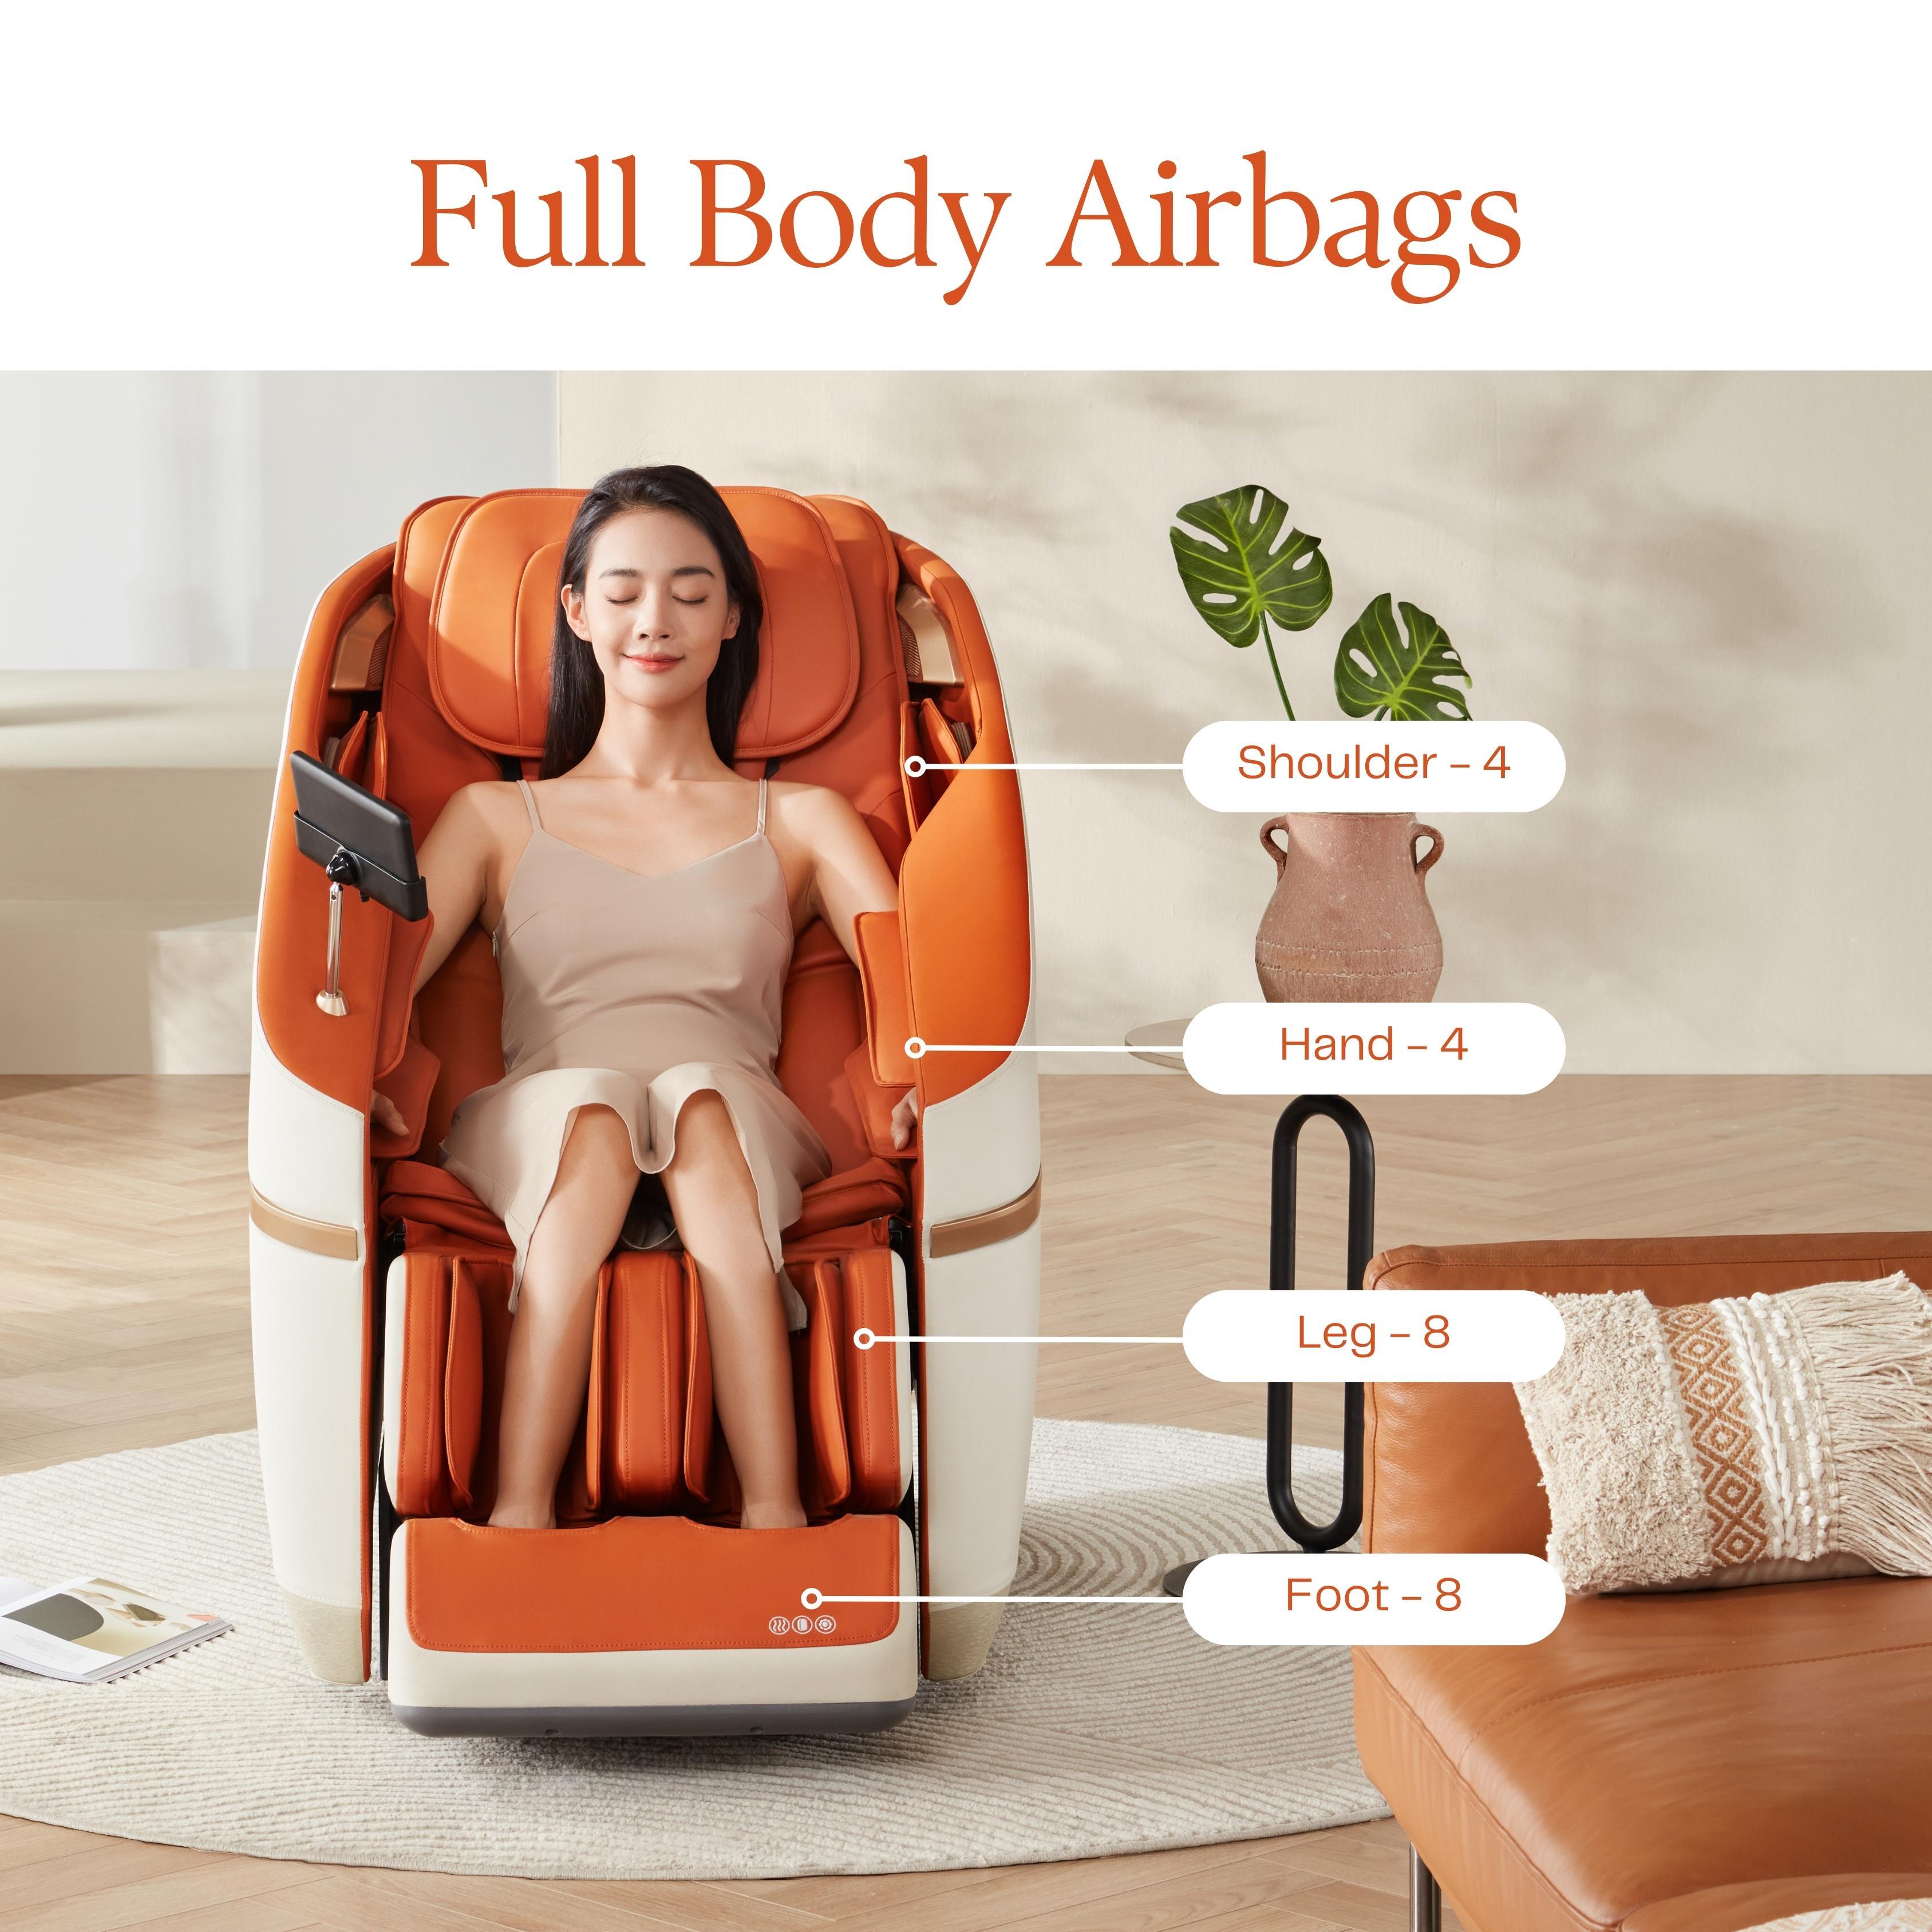 Woman enjoying the Jimny orange massage chair with full body airbags, designed for ultimate relaxation. Best massage chair UAE, Dubai.